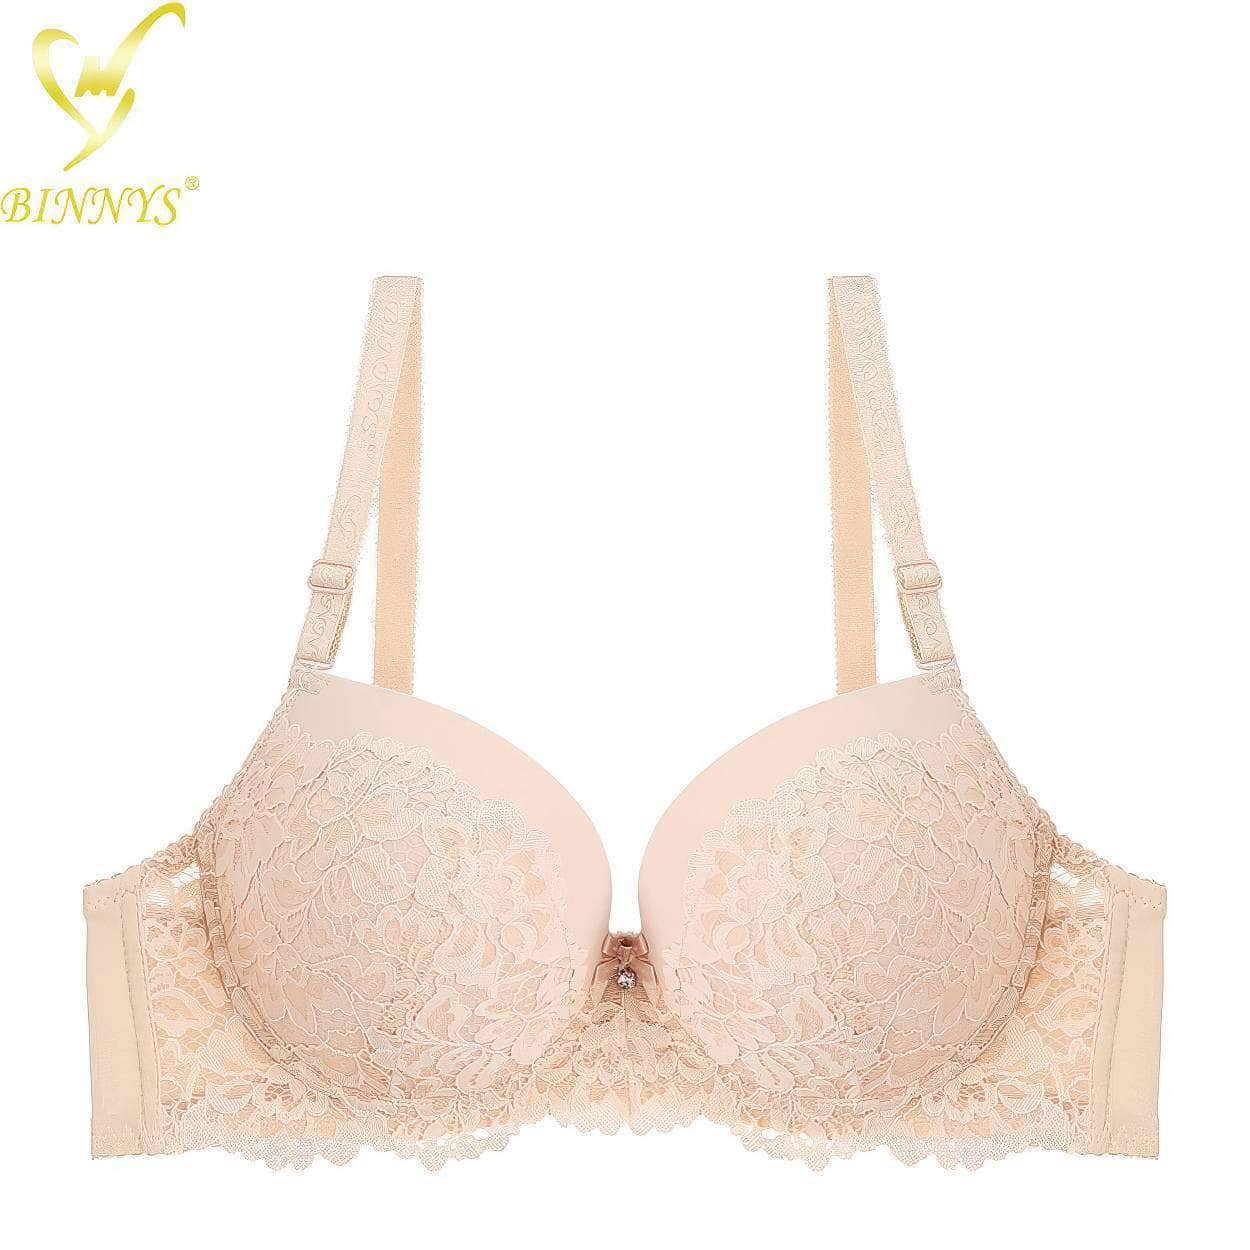 BINNYS D Cup Women's Sexy Strapless Bra: Thin Cup, Plus Size, Breathable Lace, Underwire Women Bra